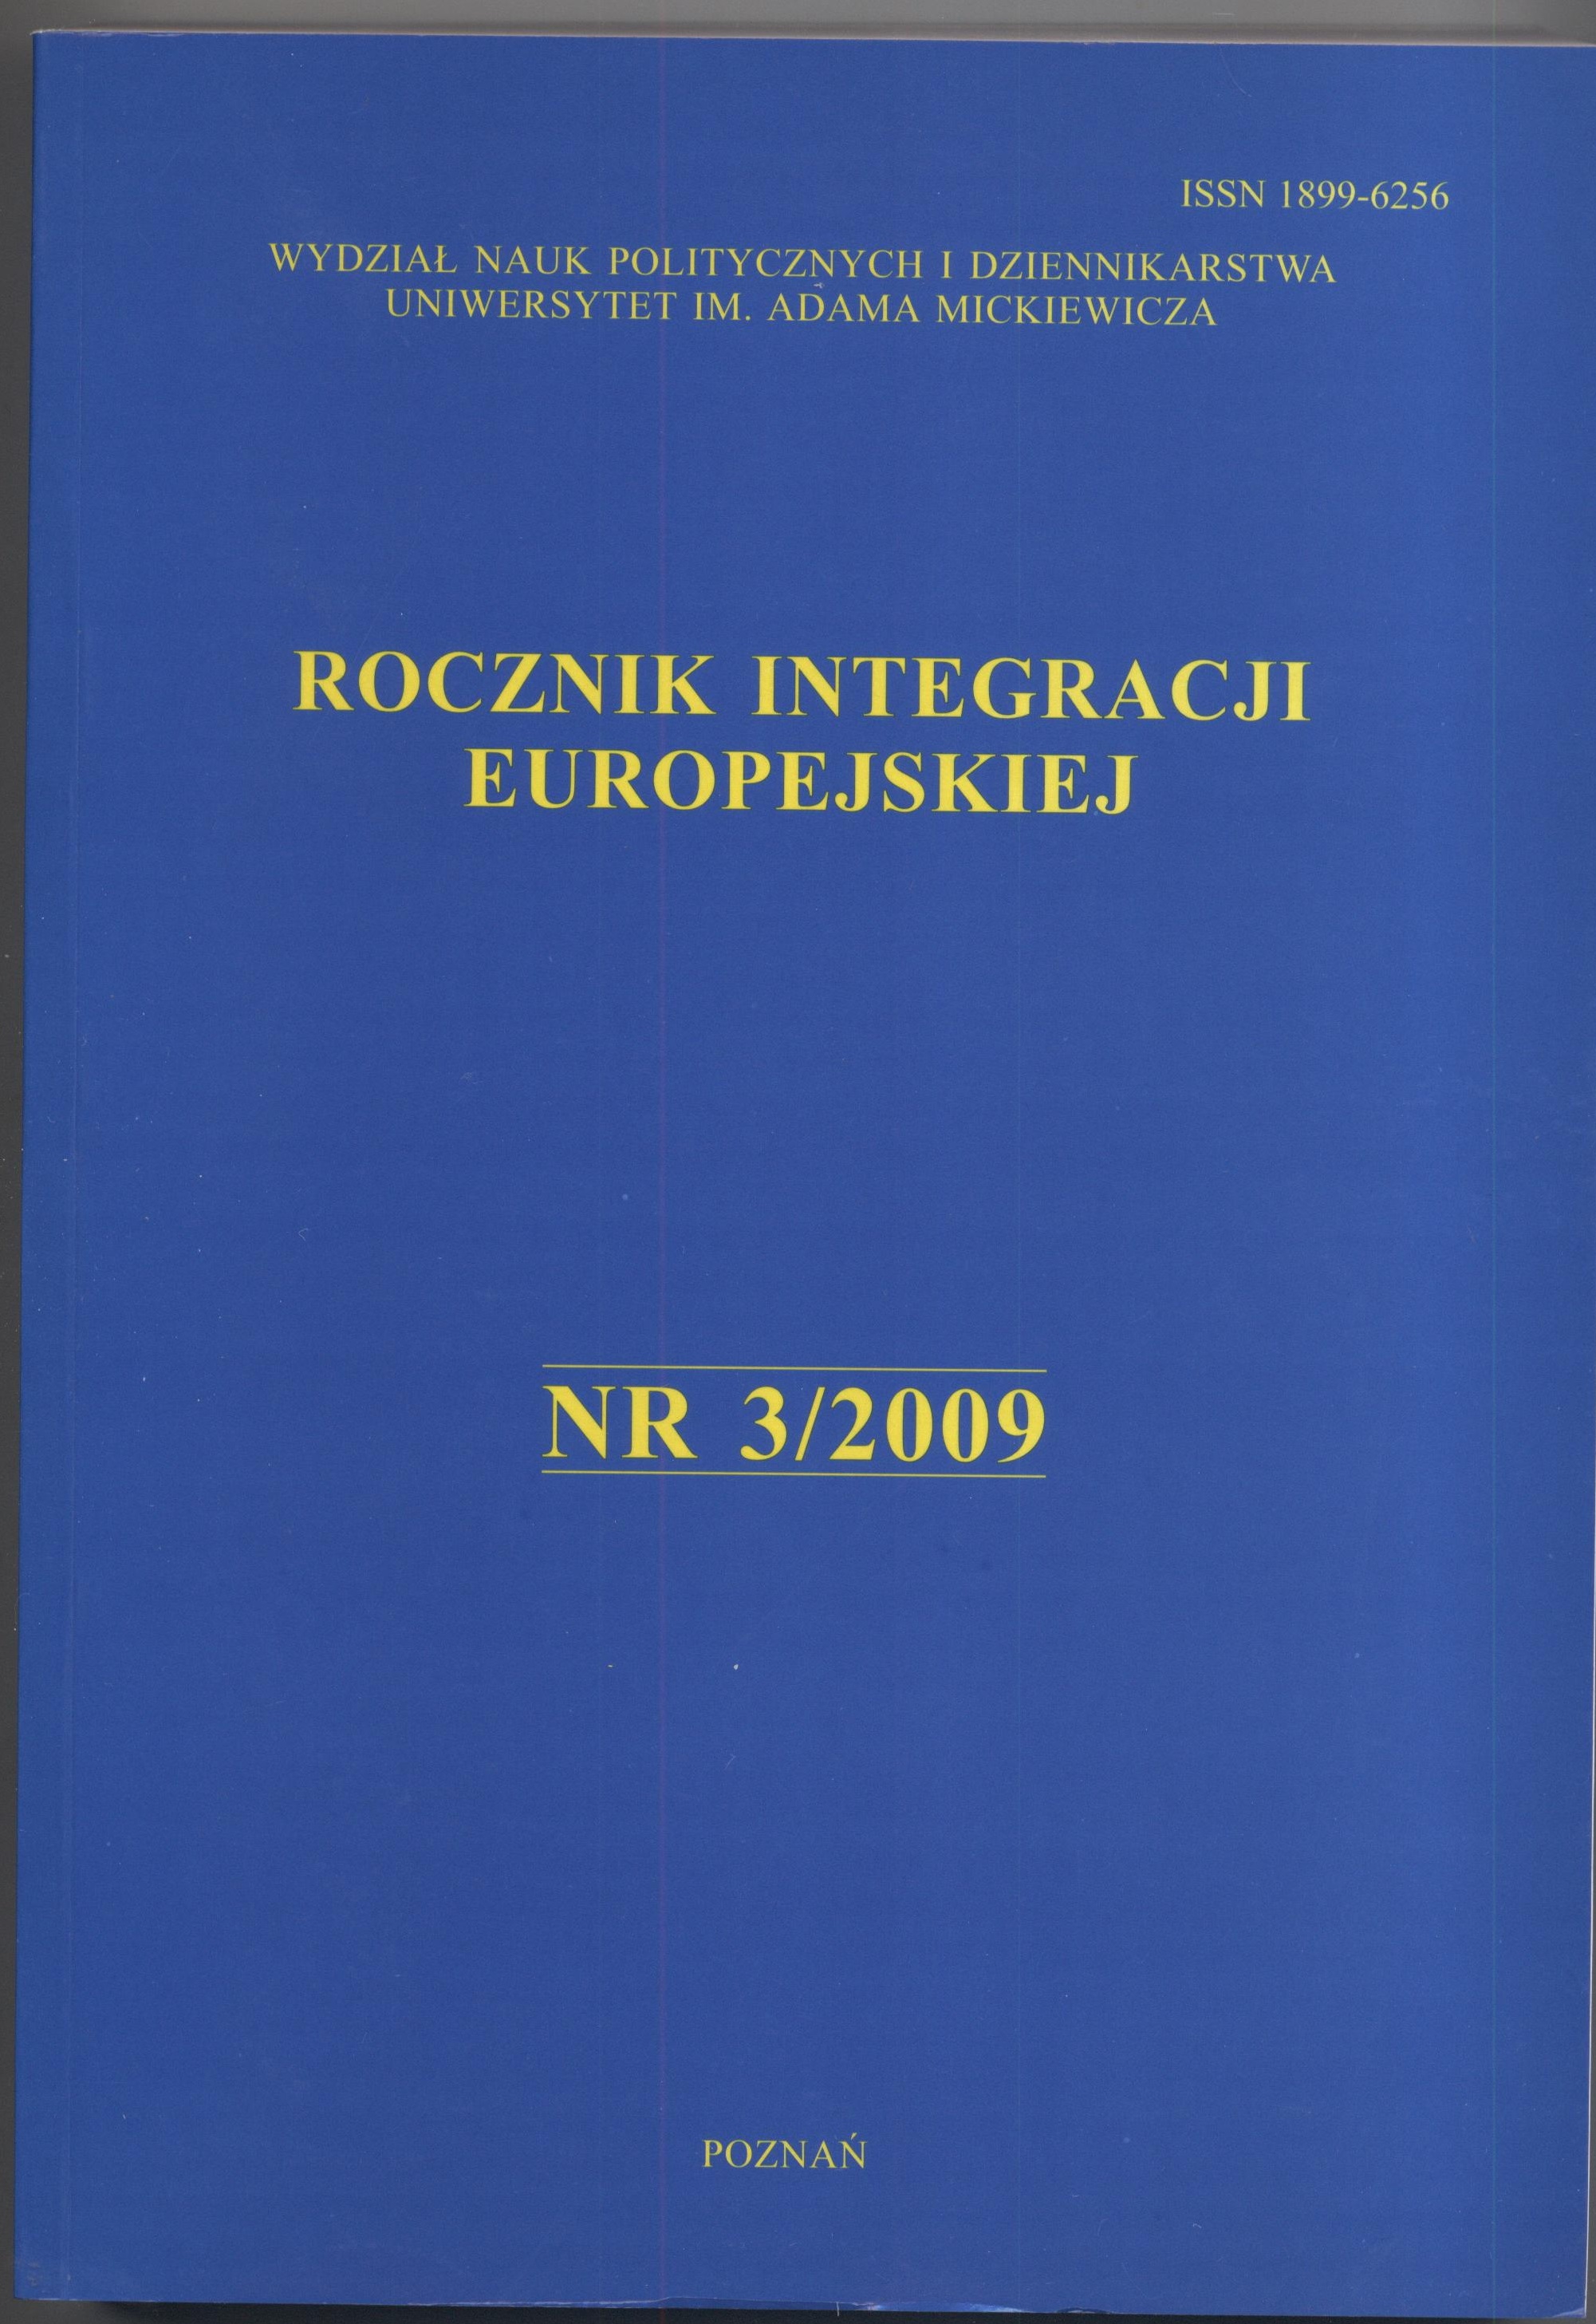 Agnieszka Bielawska, The Attitude of the Roman Catholic Church and Evangelical Church in Germany to Polish-German Reconciliation and Polish Integration with the European Communities and the European Union Cover Image